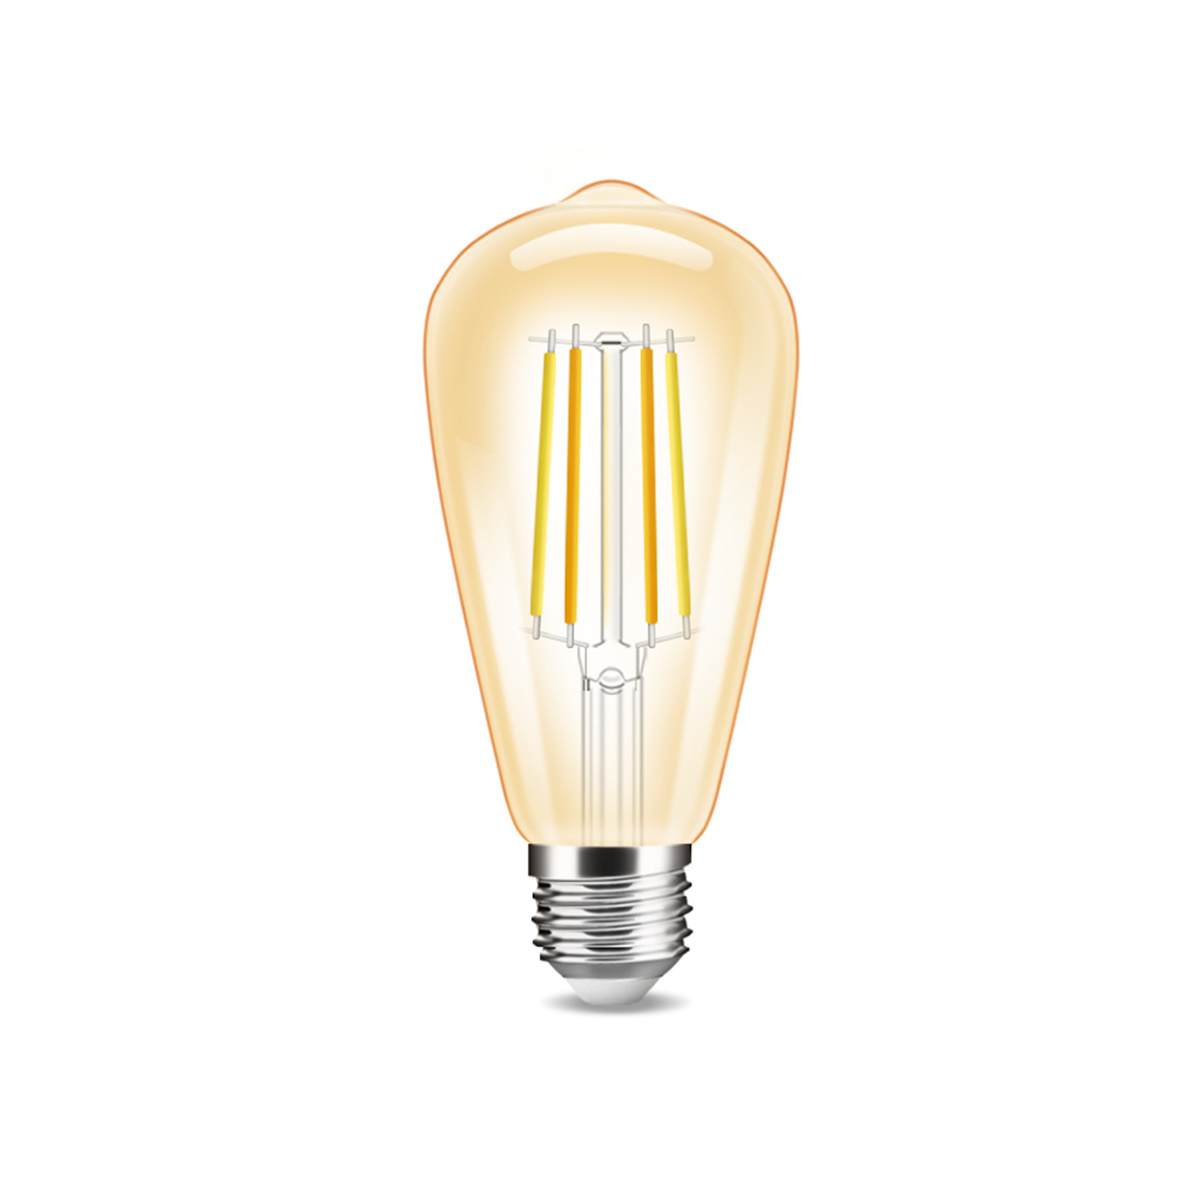 Chinese Professional Bluetooth Lighting - Dimmable Smart Filament Bulb E27 Vintage With tunable white 2200-6500K CBS – C-Lux